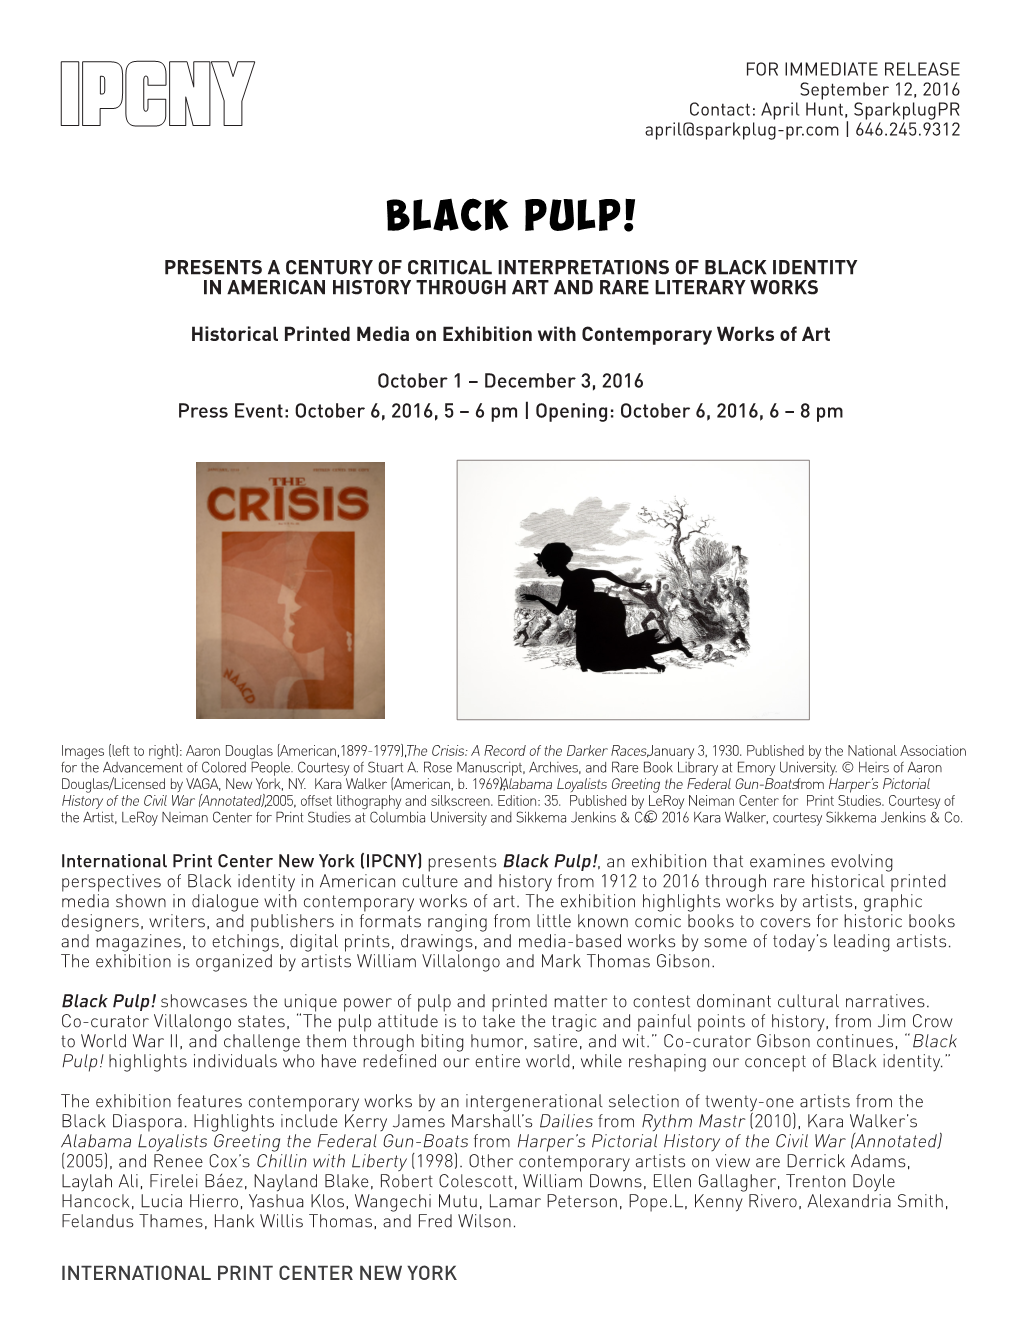 Black Pulp! Presents a Century of Critical Interpretations of Black Identity in American History Through Art and Rare Literary Works